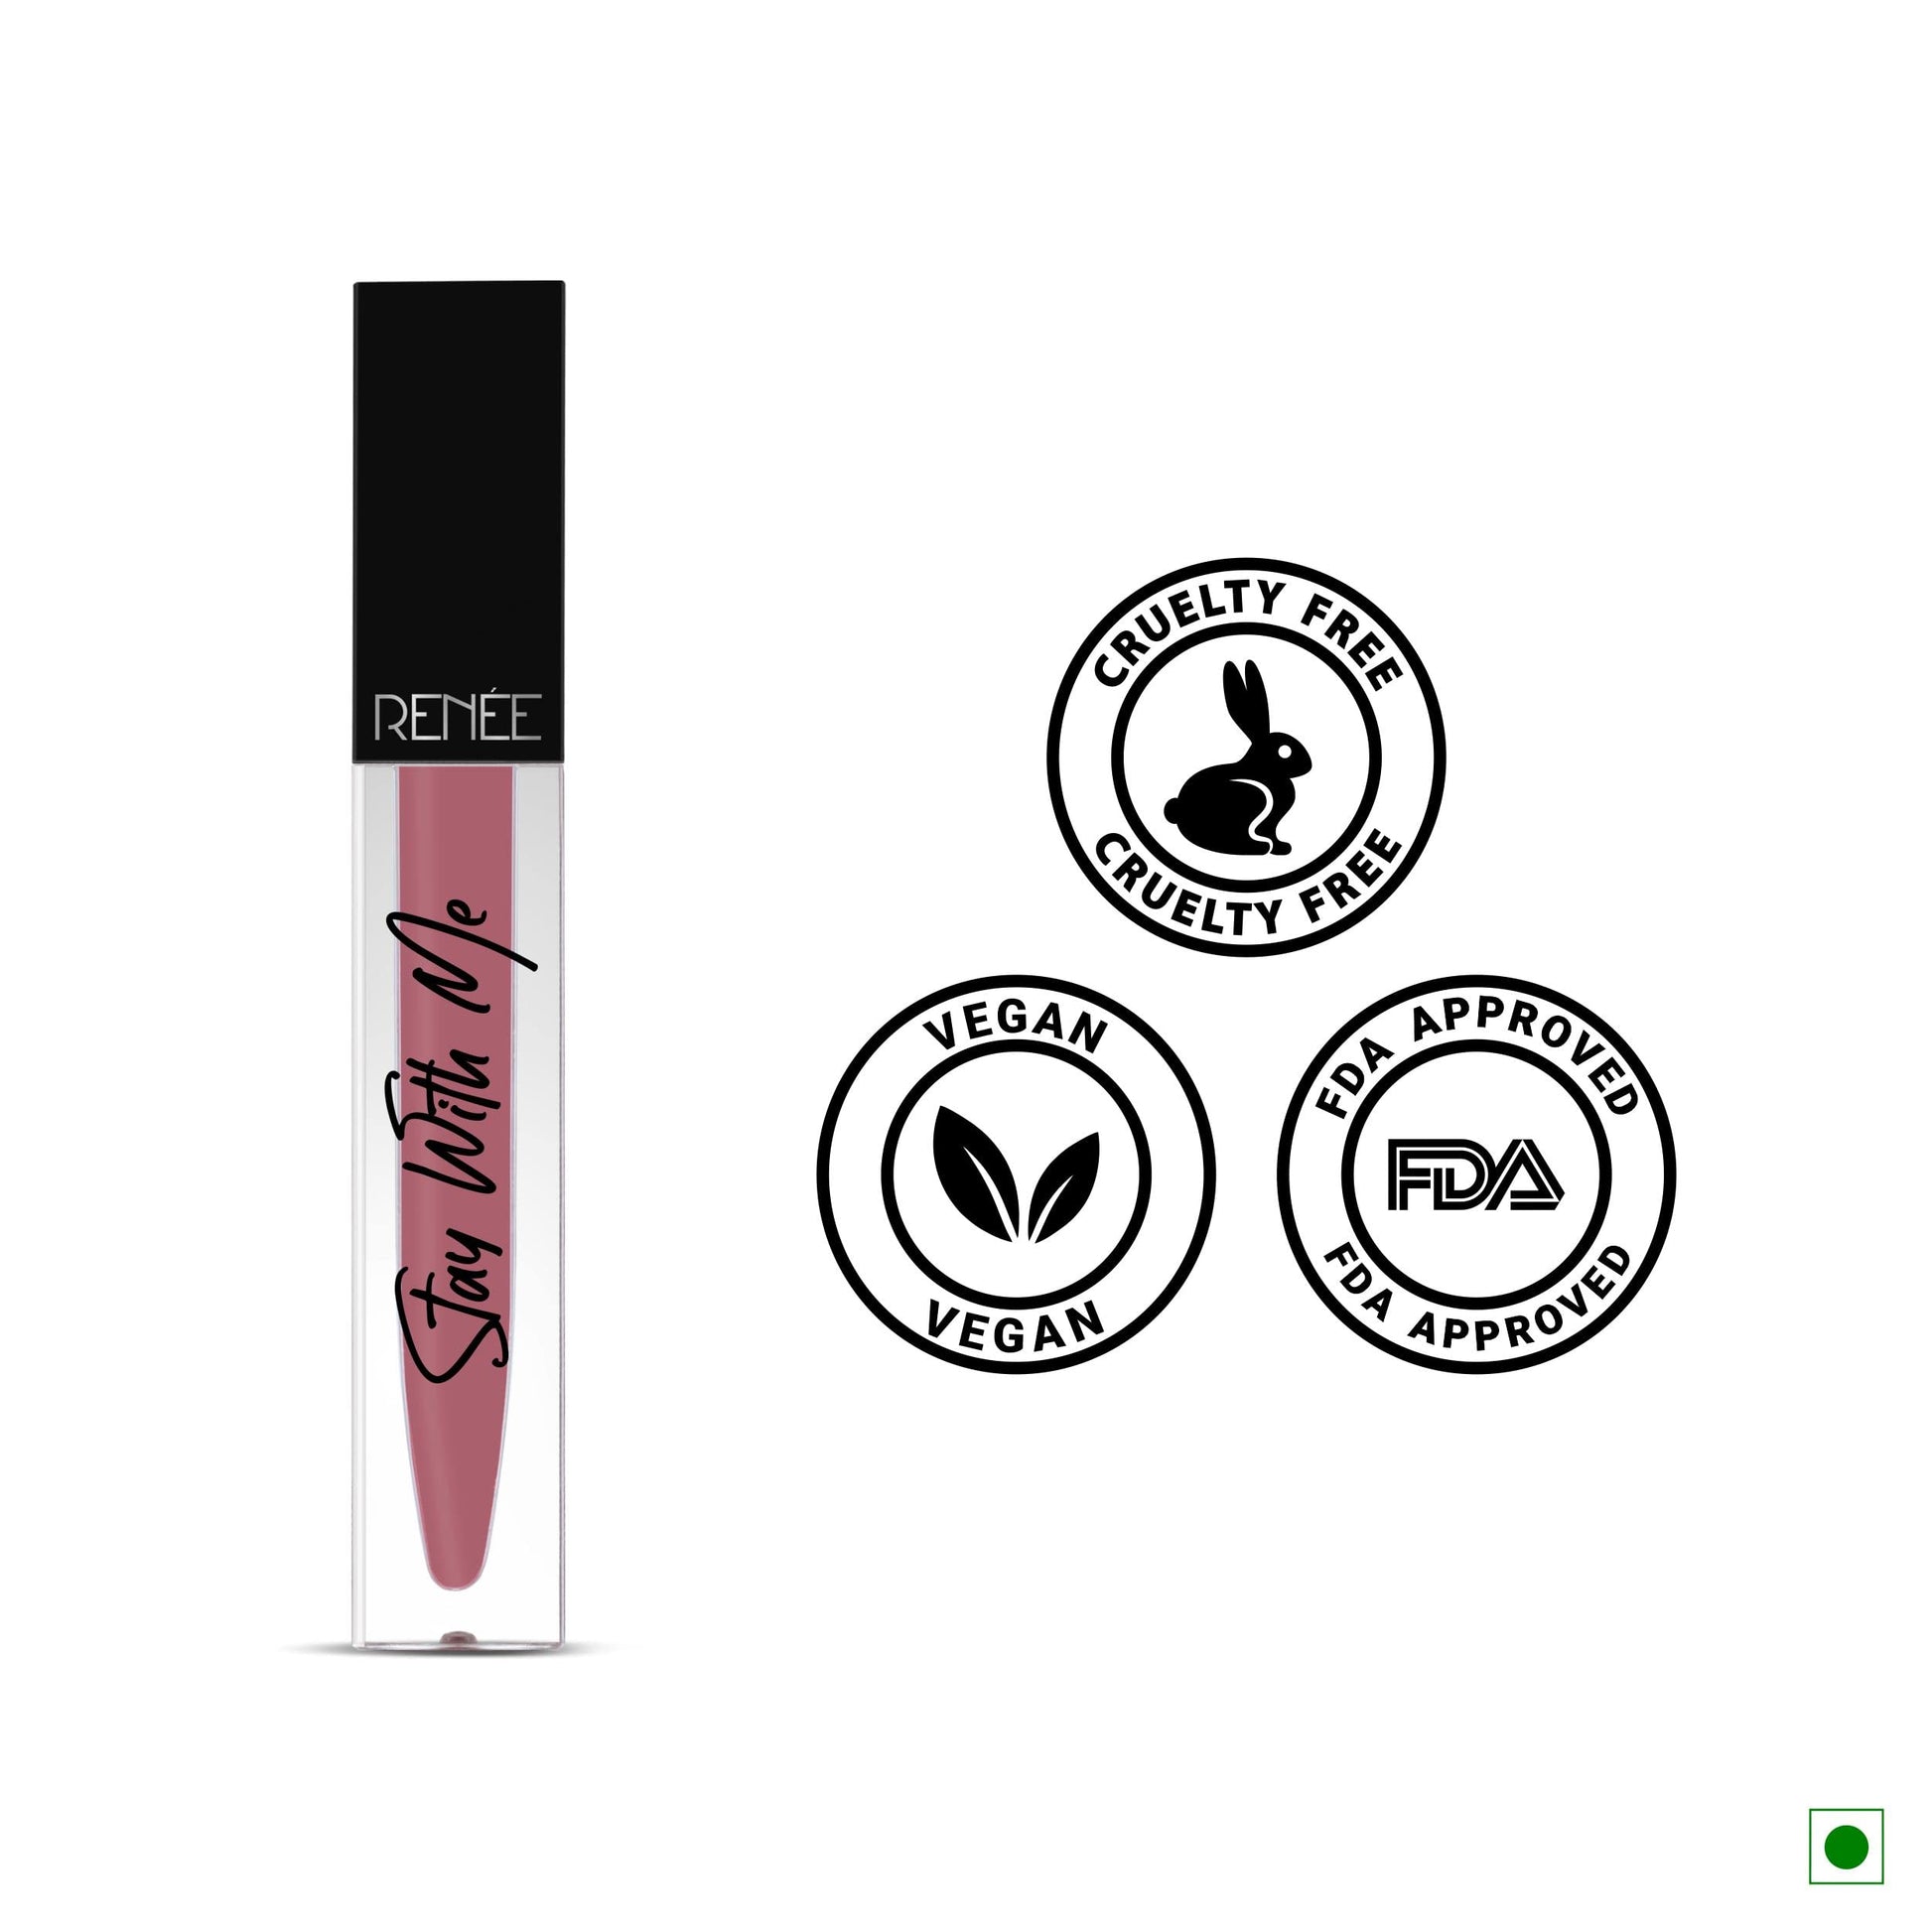 RENEE Stay With Me Matte Lip Color, Long Lasting, Non Transfer, Water & Smudge Proof, Light Weight Liquid Lipstick, Awe for Mauve, 5ml  from RENEE